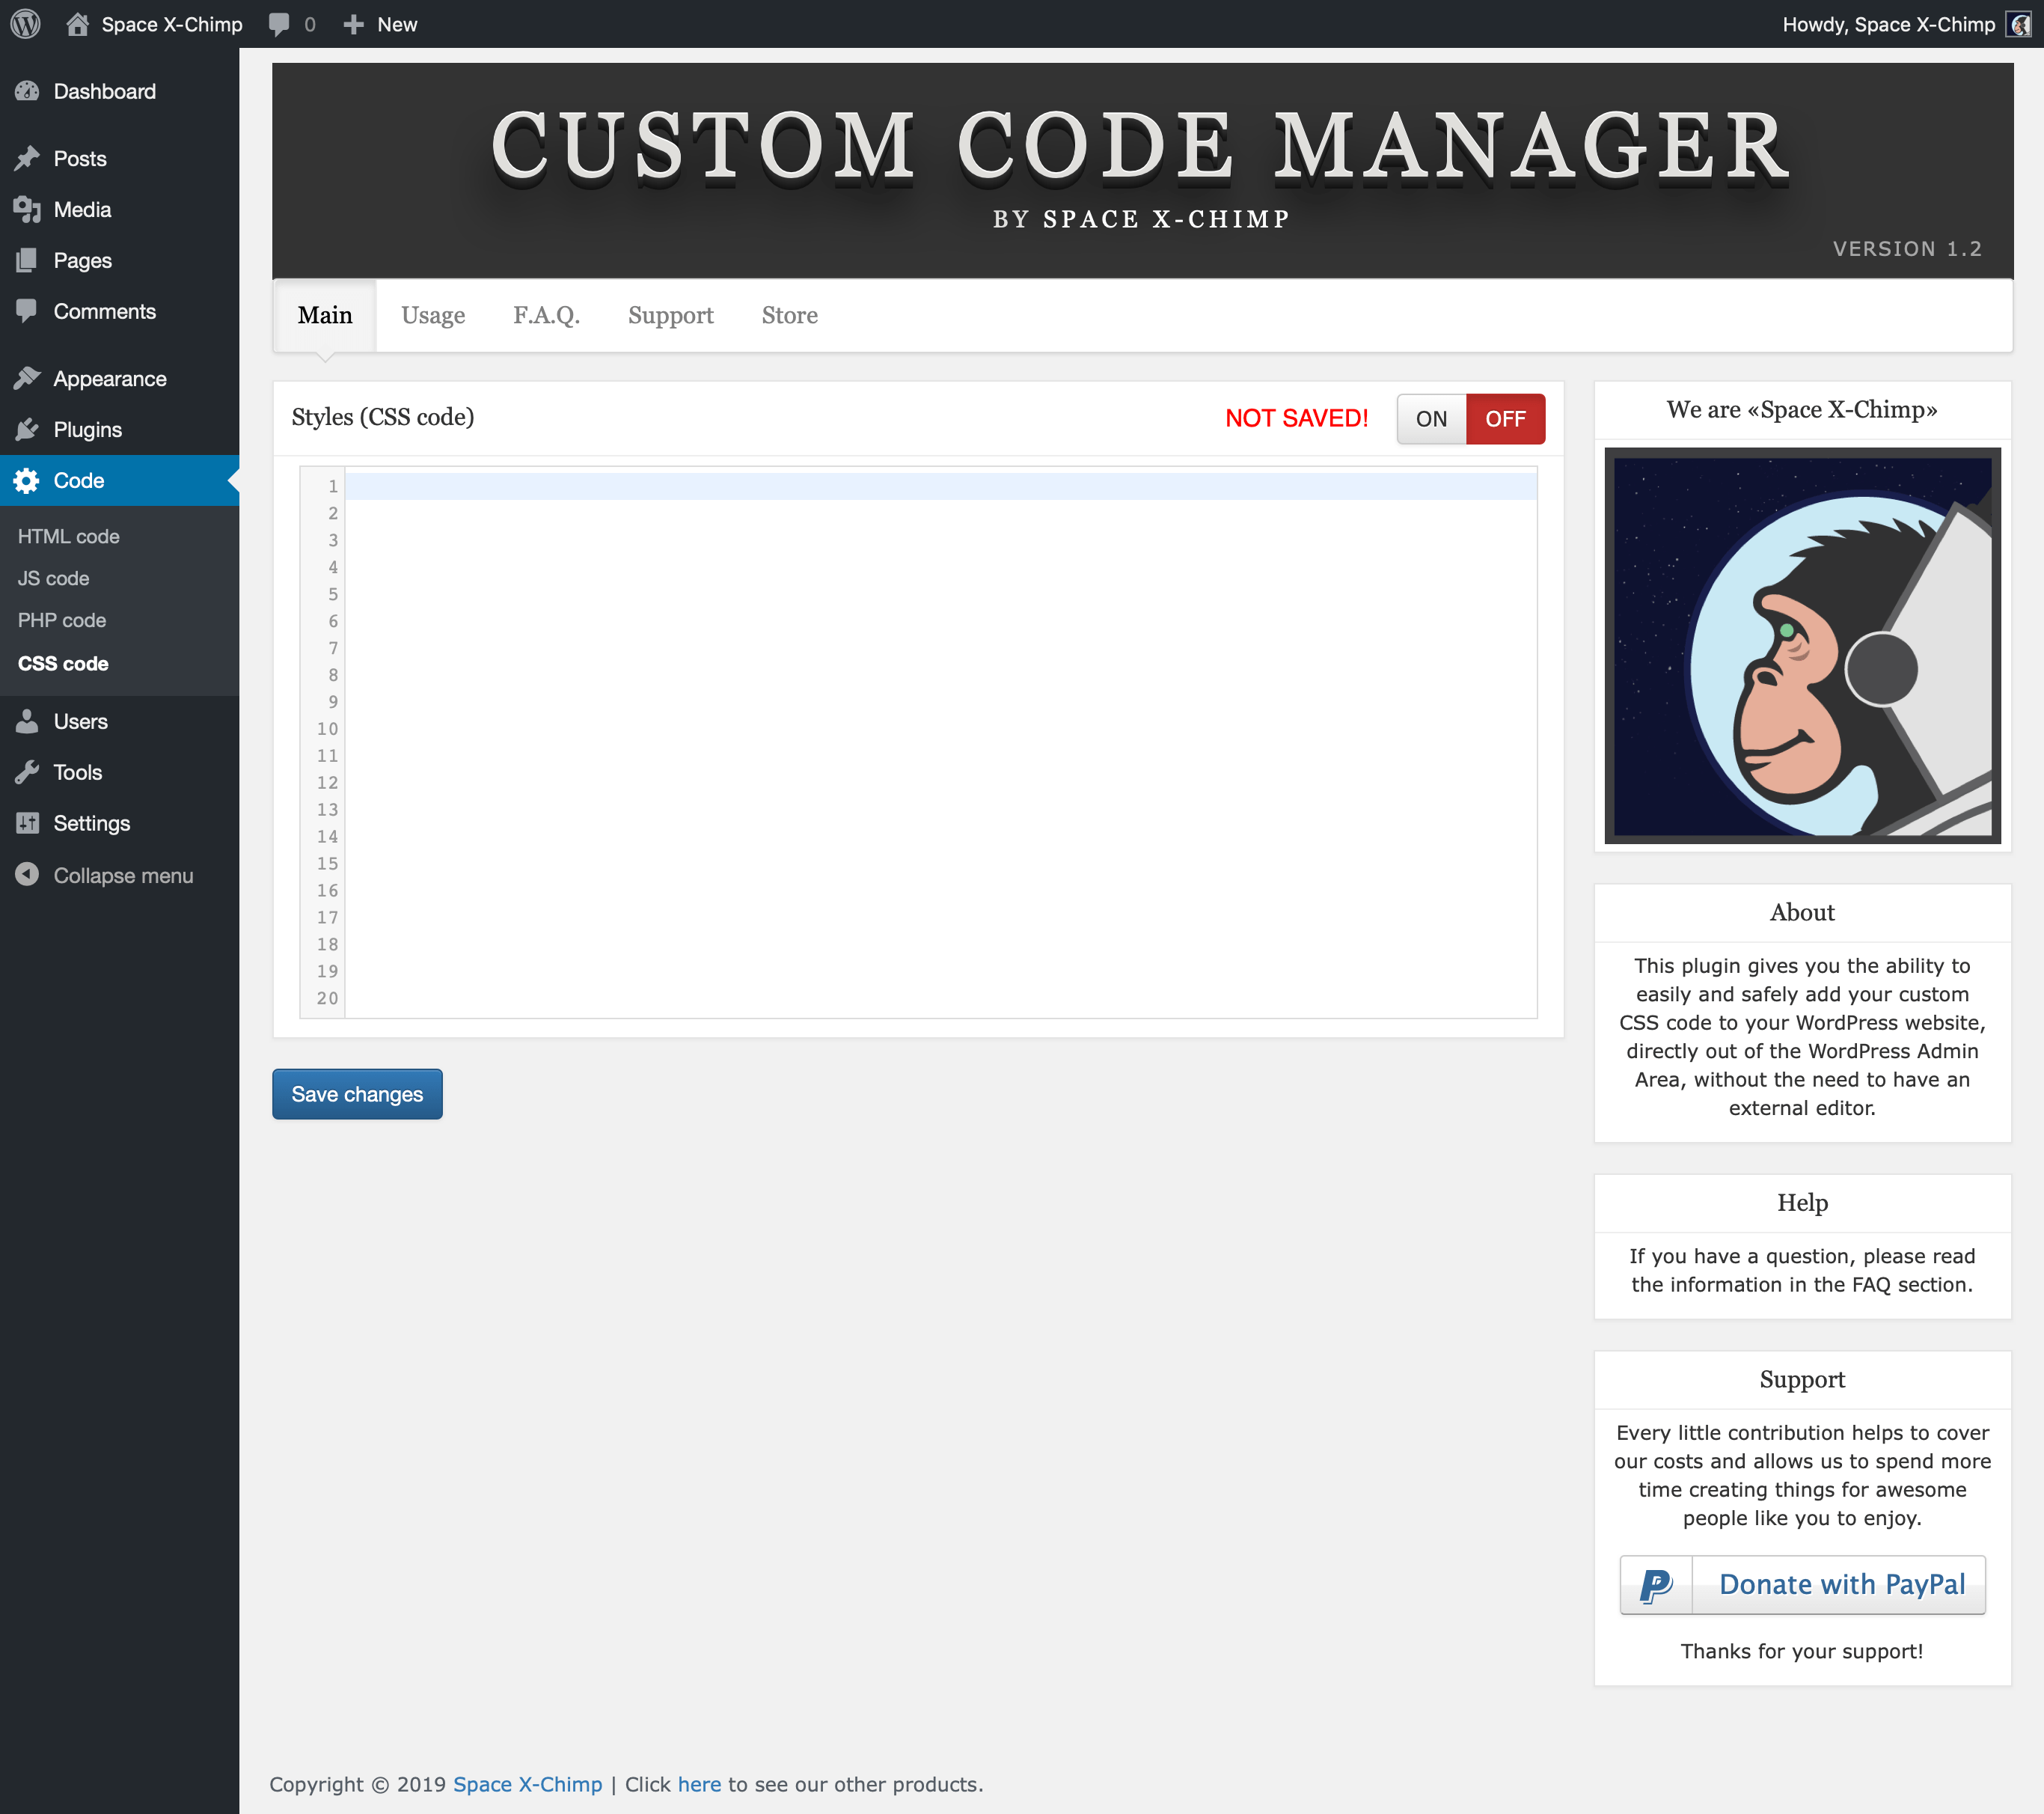 WP plugin "Custom Code Manager" by Space X-Chimp